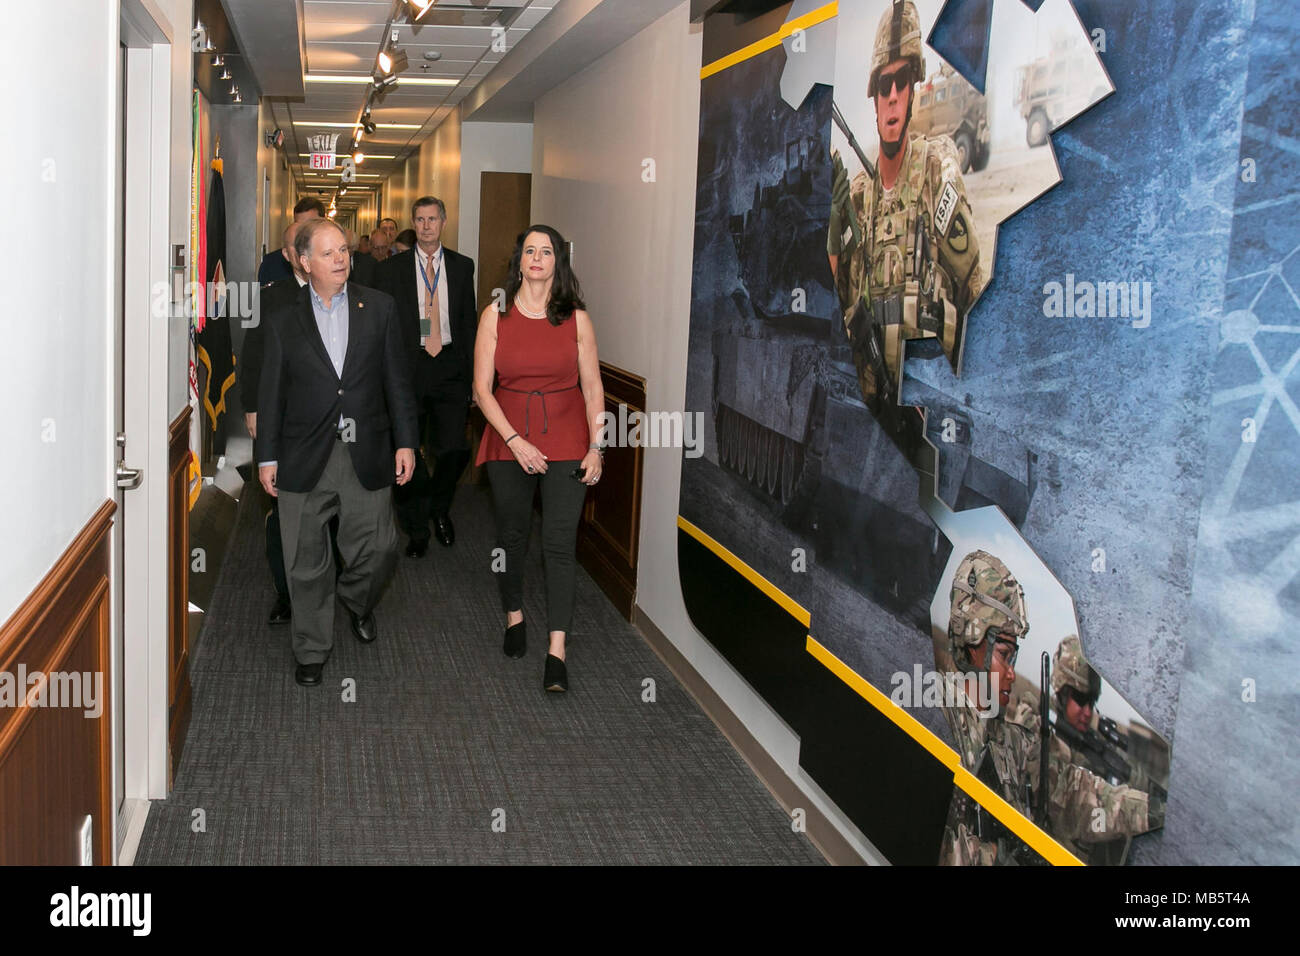 U.S. senator Doug Jones visits the Army Materiel Command headquarters at Redstone Arsenal, Alabama, Feb. 22, 2018. This is Jones' first visit to AMC since becoming a senator for the state of Alabama. Stock Photo